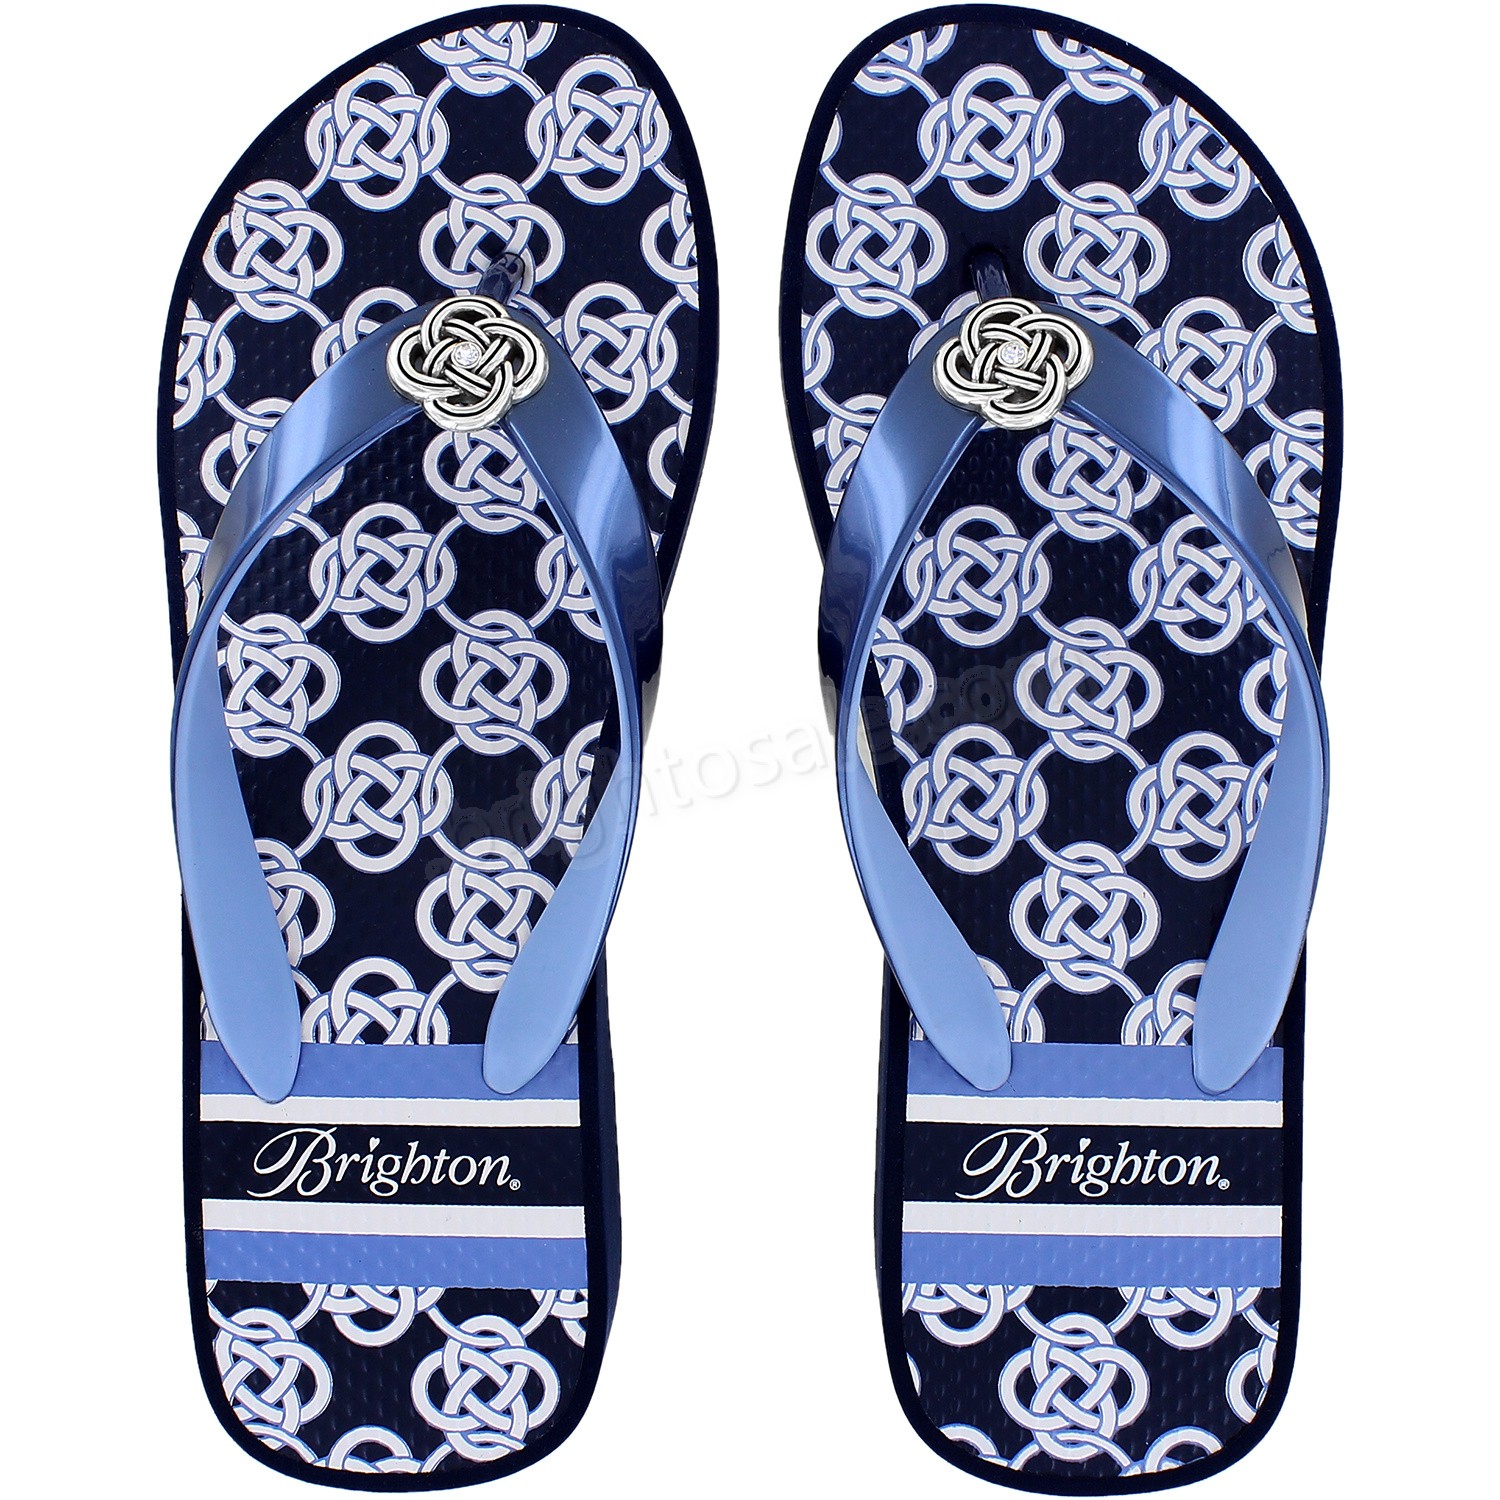 Brighton Collectibles & Online Discount Mishel Loafers - Brighton Collectibles & Online Discount Mishel Loafers